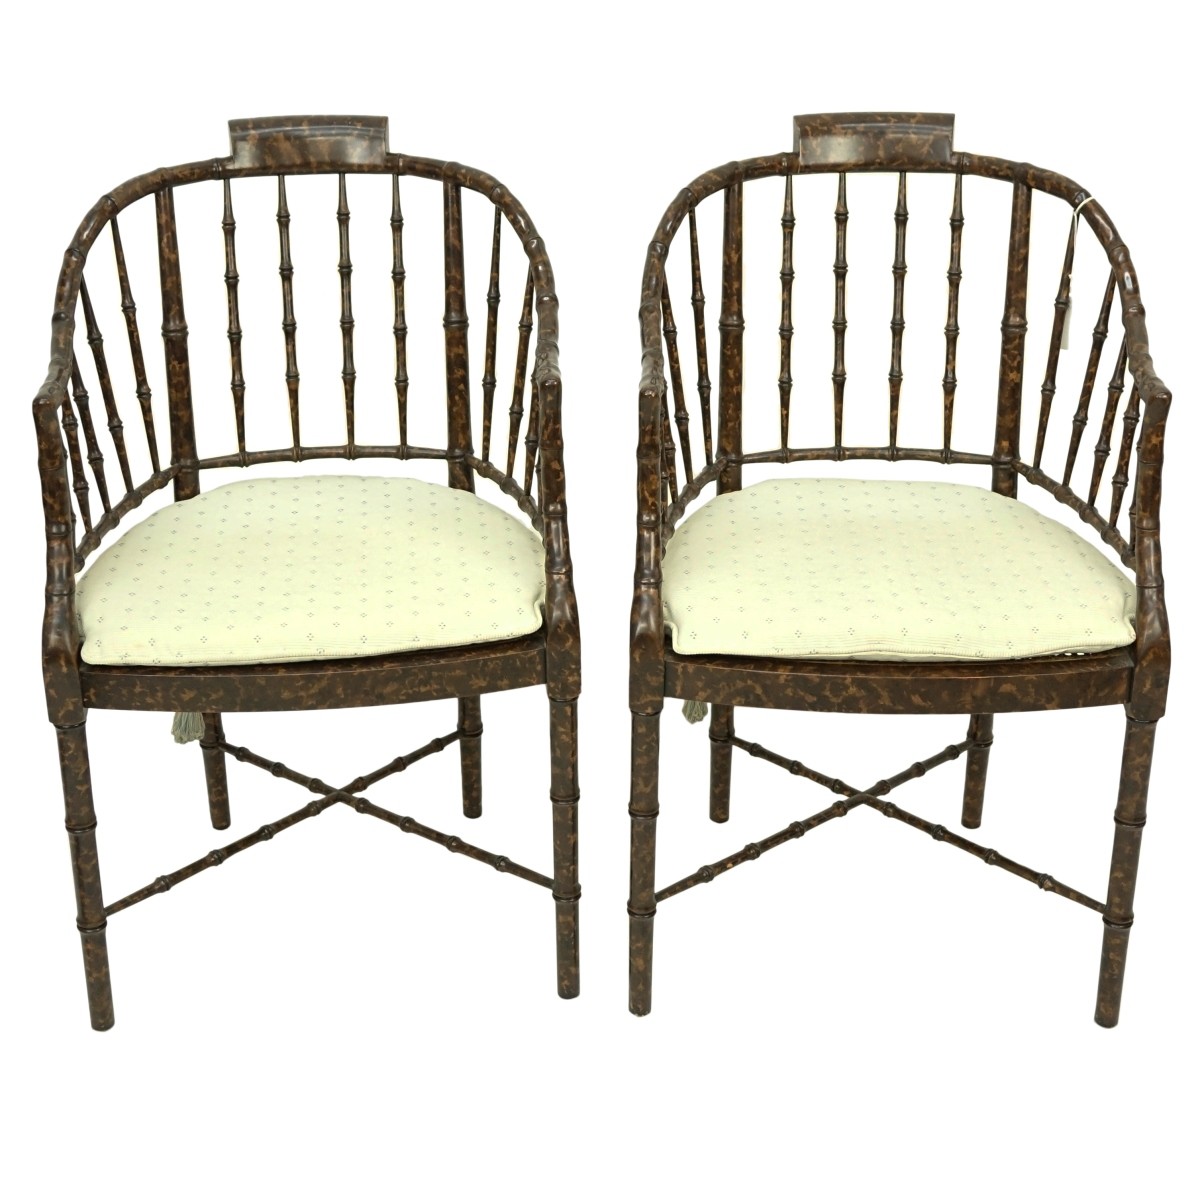 Pair of Faux Tortoise Bamboo Stylized Armchairs